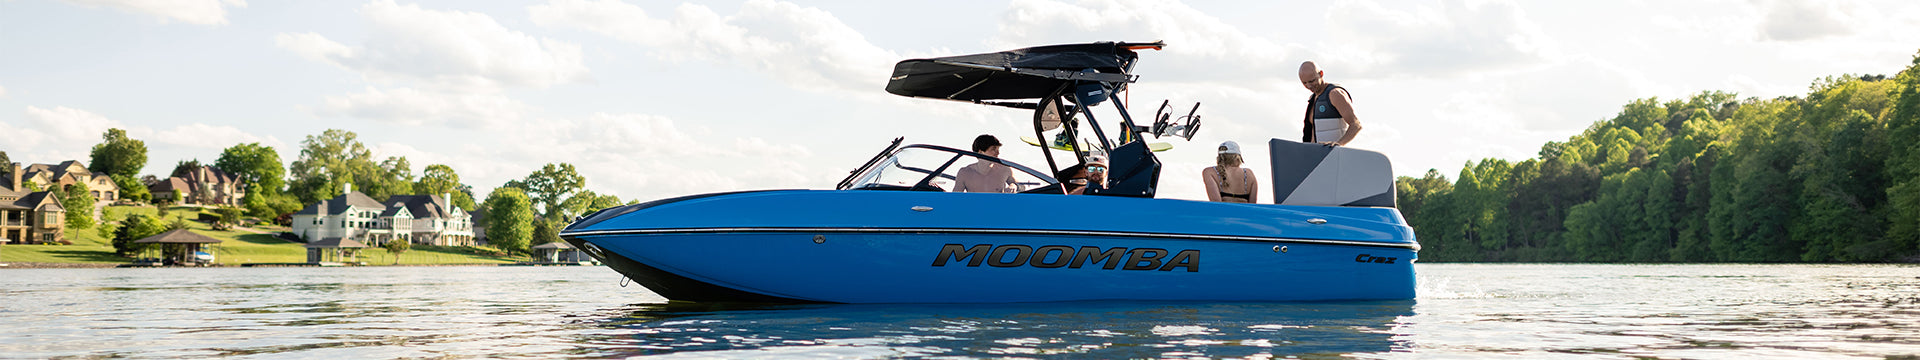 Moomba Boat Parts & Accessories